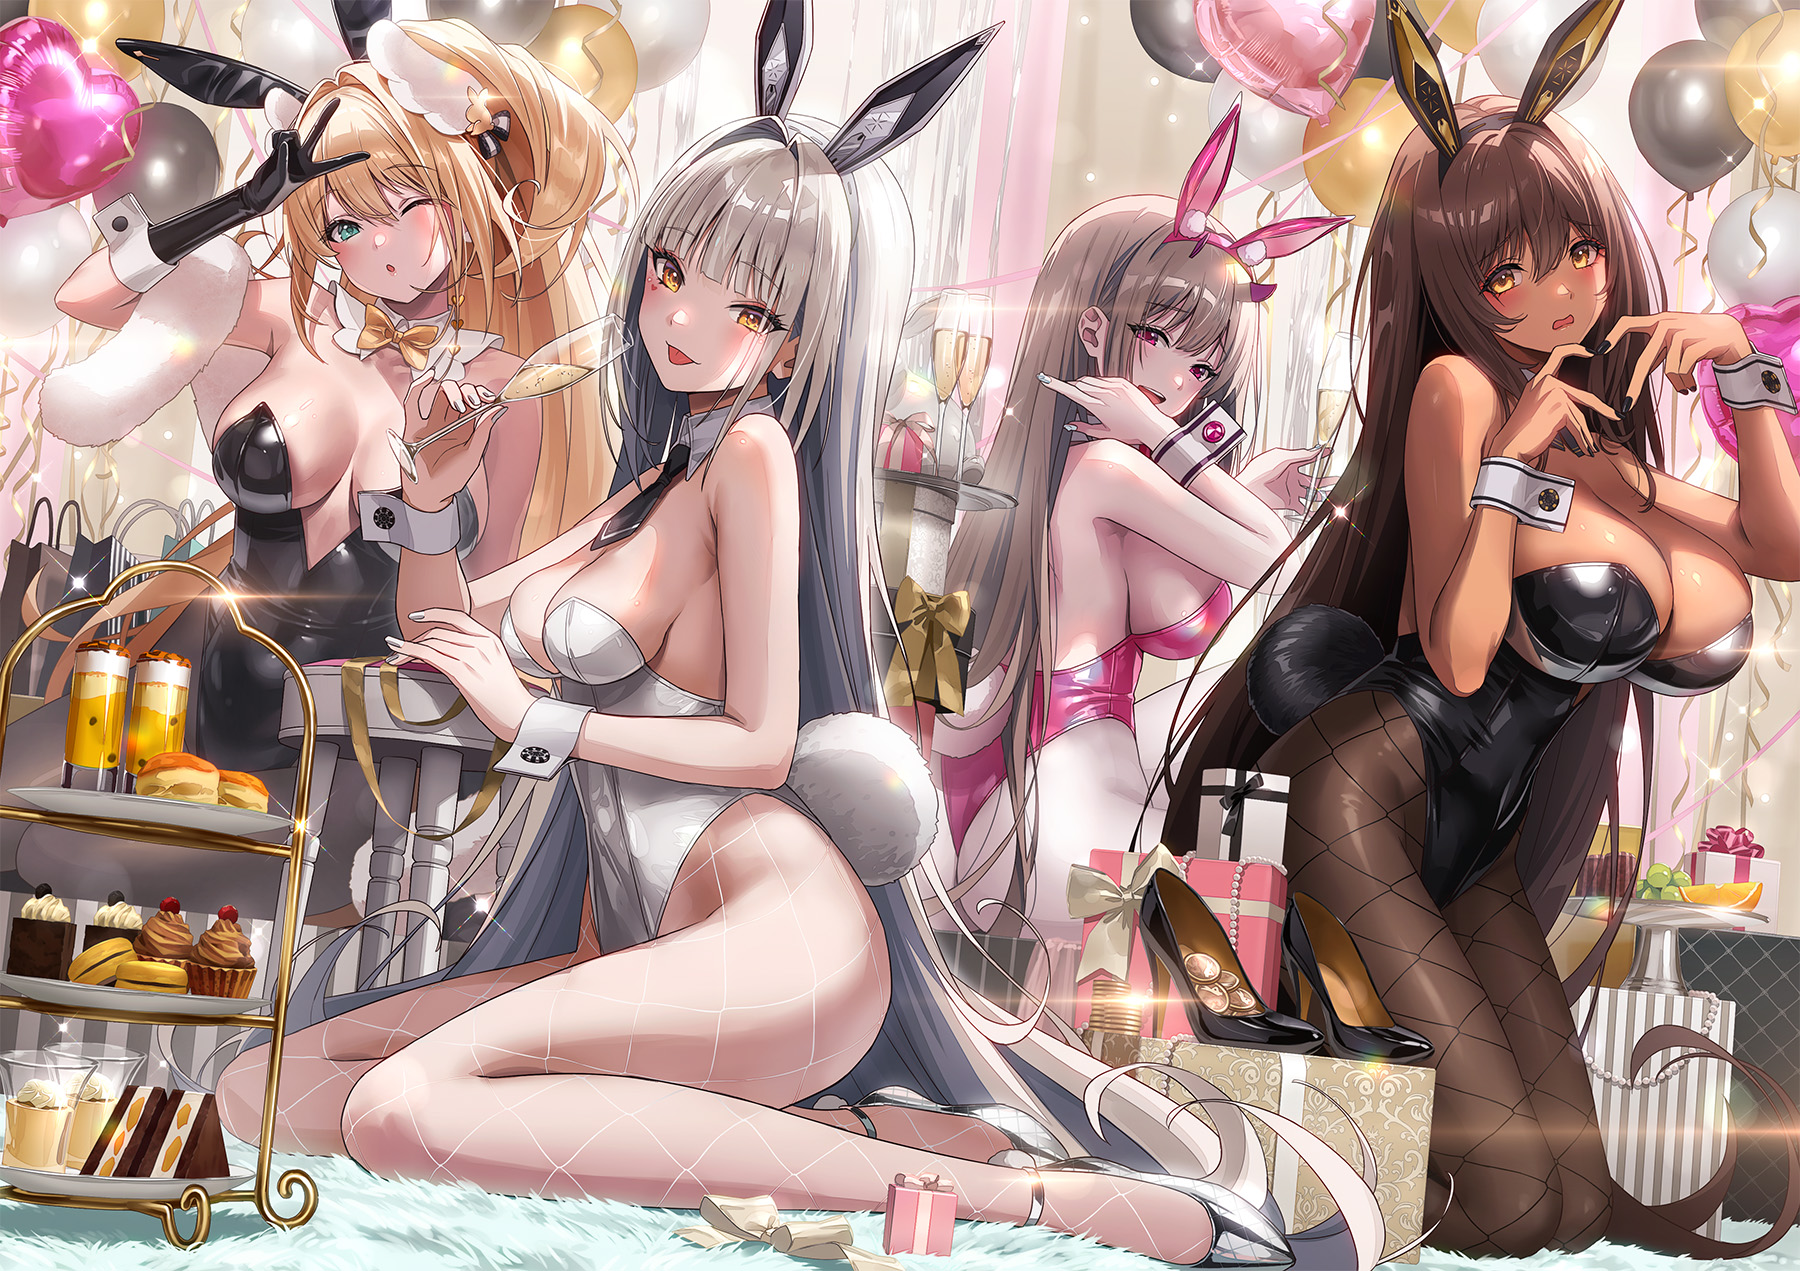 Anime 1800x1271 Nikke: The Goddess of Victory women quartet kneeling group of women long hair Blanc (Nikke) Noir (Nikke) Rupee (Nikke: The Goddess of Victory) Viper (Nikke: The Goddess Of Victory) looking at viewer cleavage peace sign hand gesture women indoors bunny tail bunny ears bare shoulders fishnet pantyhose leotard bunny suit looking back boobs one eye closed Sonsoso wristwatch wink animal ears champagne cake presents fishnet pastries wine glass thighs balloon cup